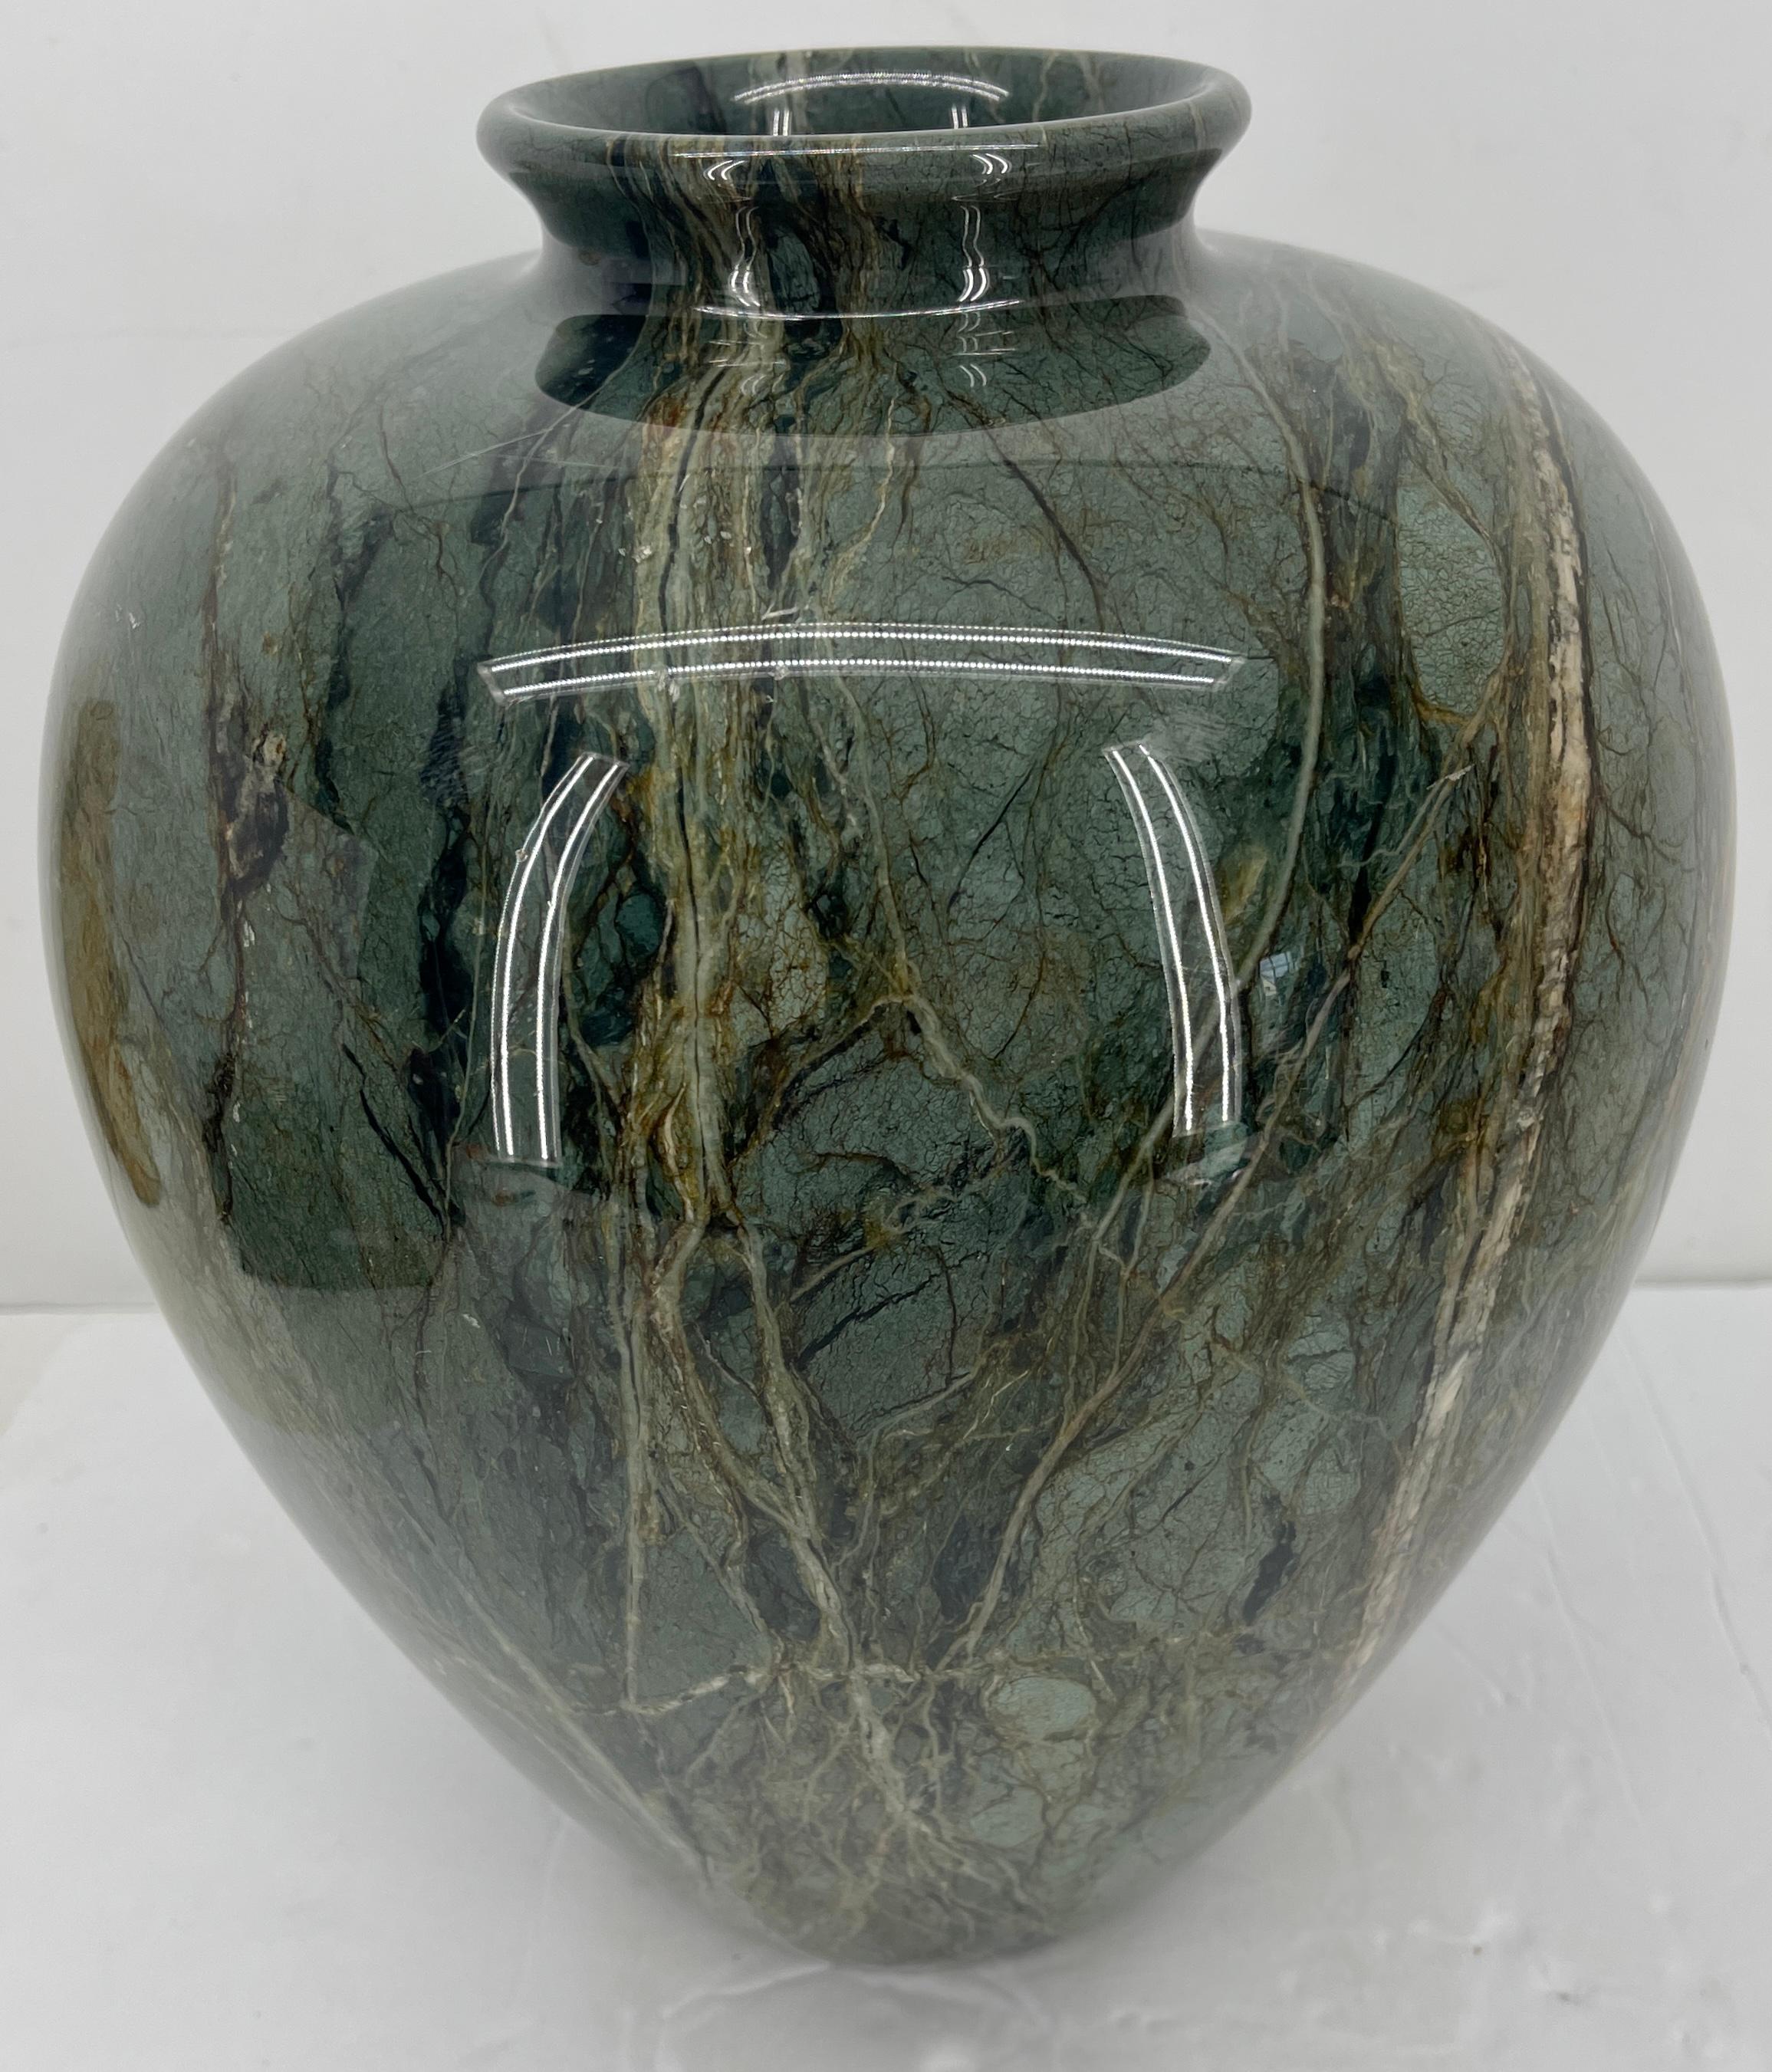 Large Mid-Century Modern European green marble vase or urn. Circa 1960's, this magnificent tear drop shaped marble vase is time and elegant in any decor. The vase is perfect as a desk accessory, center table piece or bookshelf decor. Fully